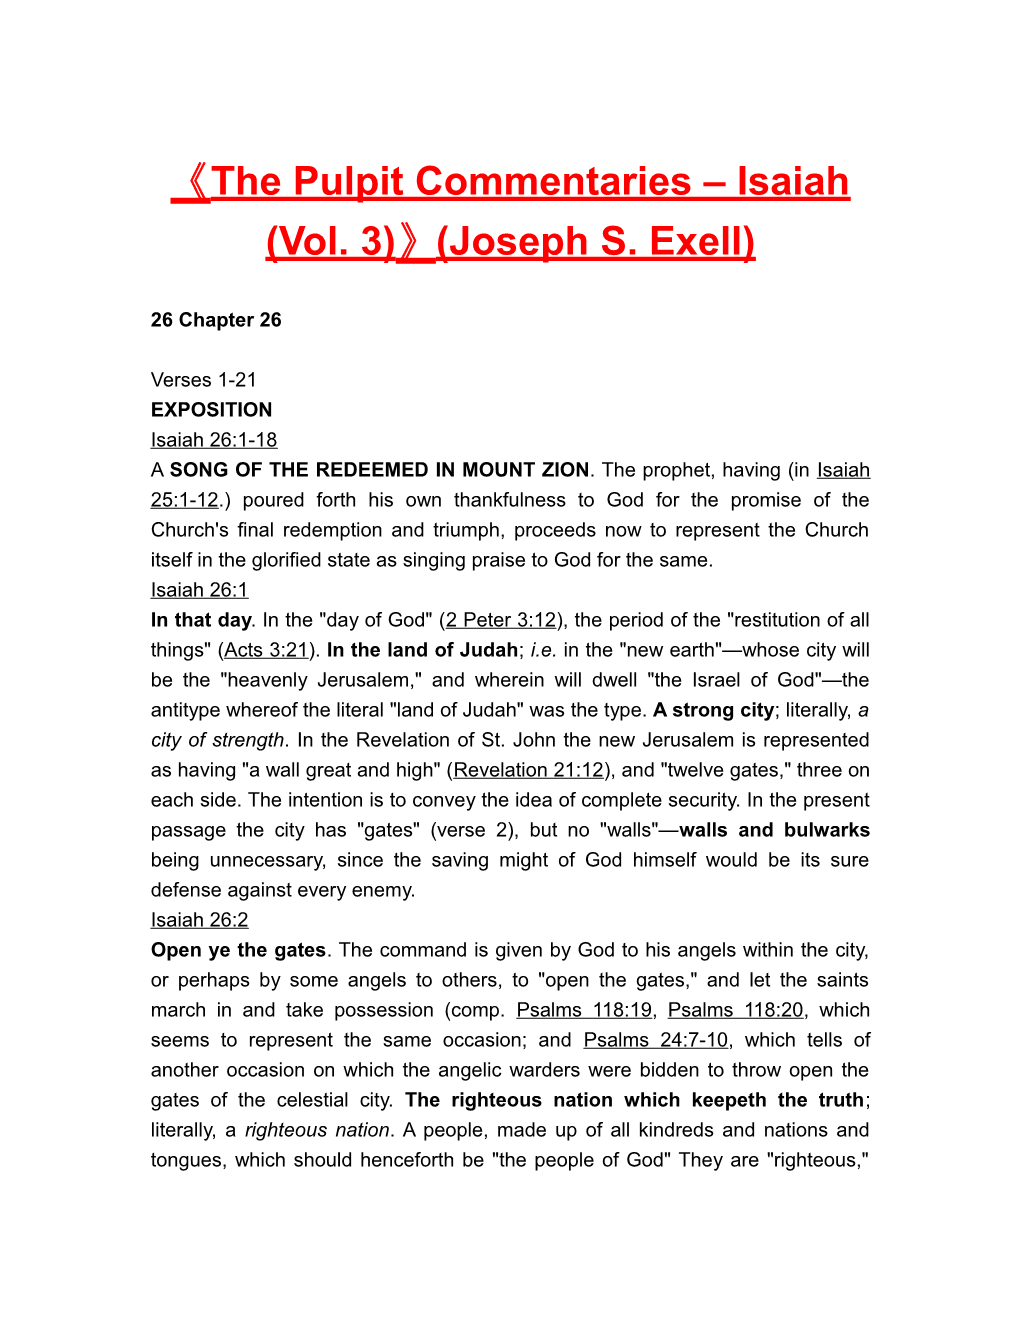 The Pulpit Commentaries Isaiah (Vol. 3) (Joseph S. Exell)